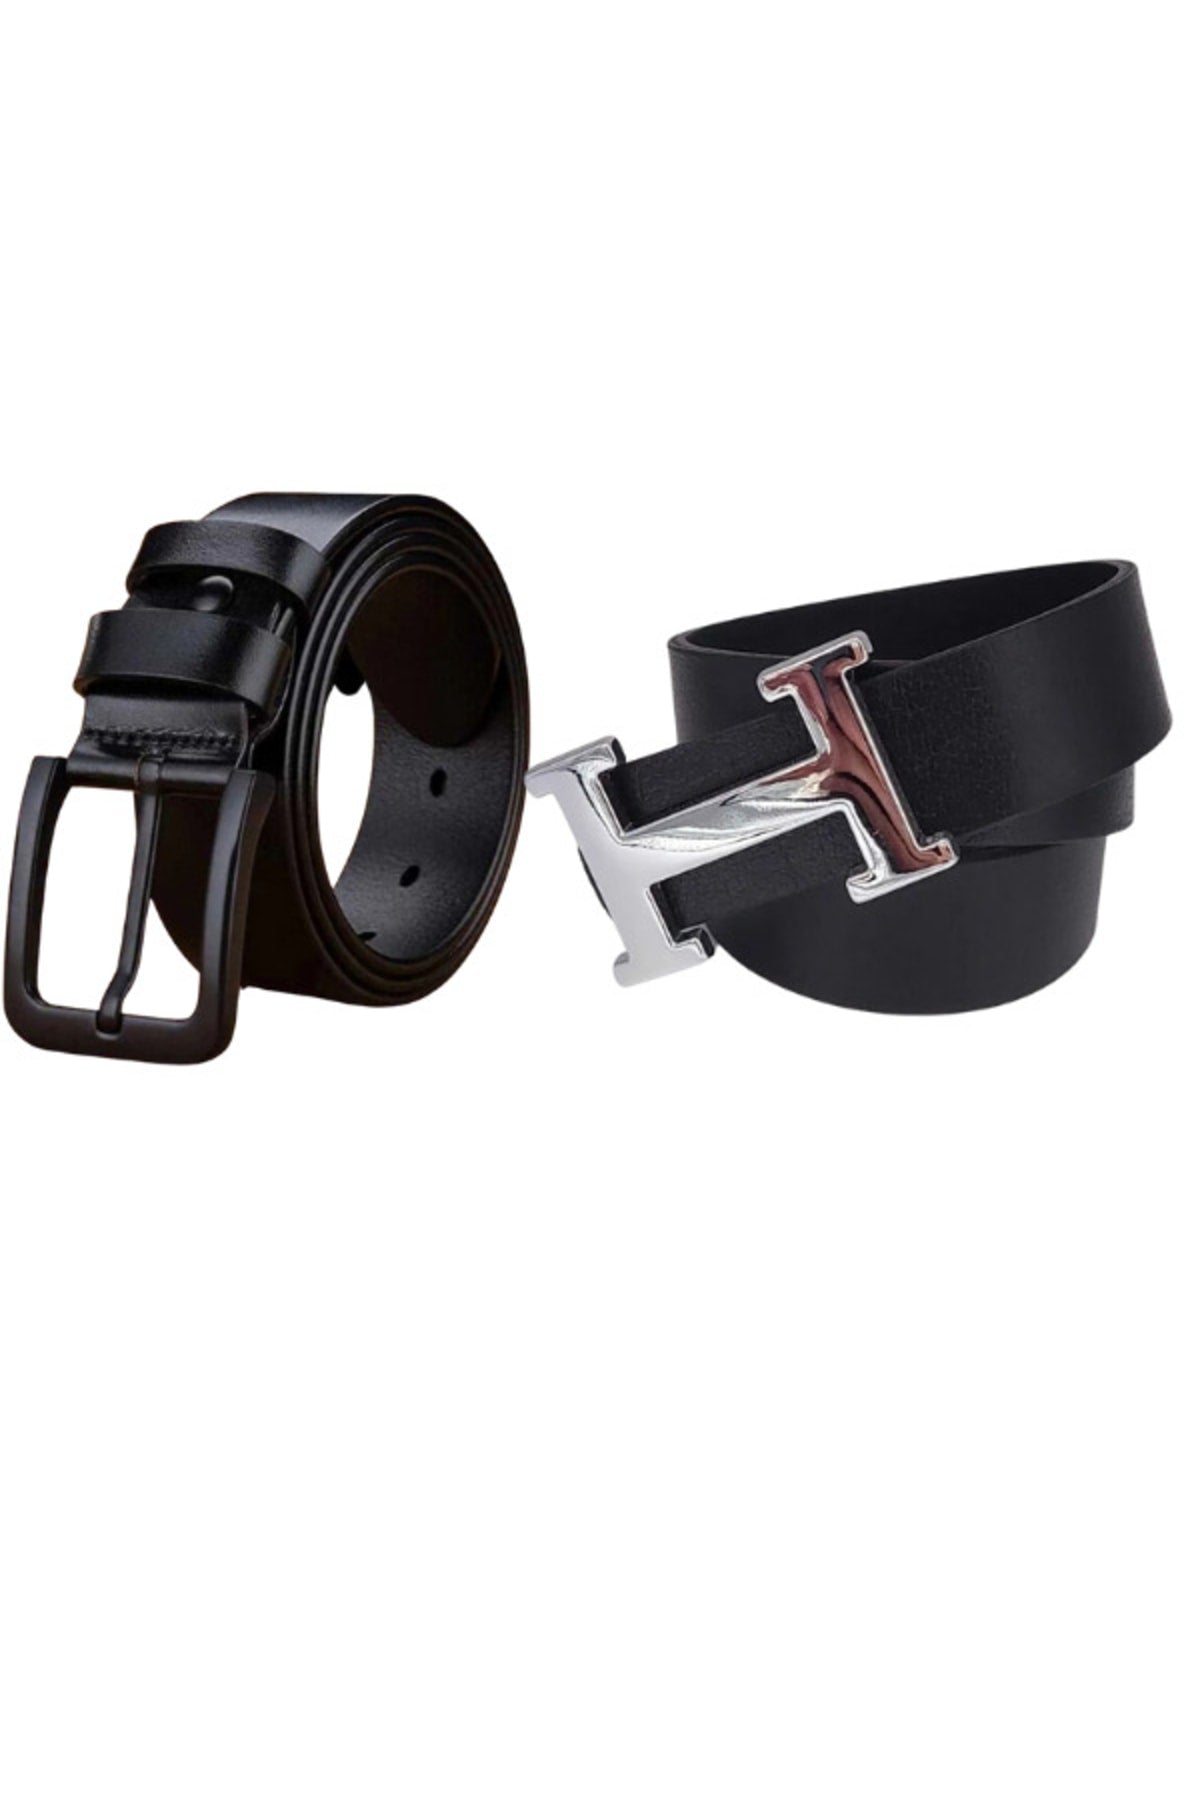 Belt Suitable for Men's Leather, Jeans and Canvas Trousers 2 Pieces